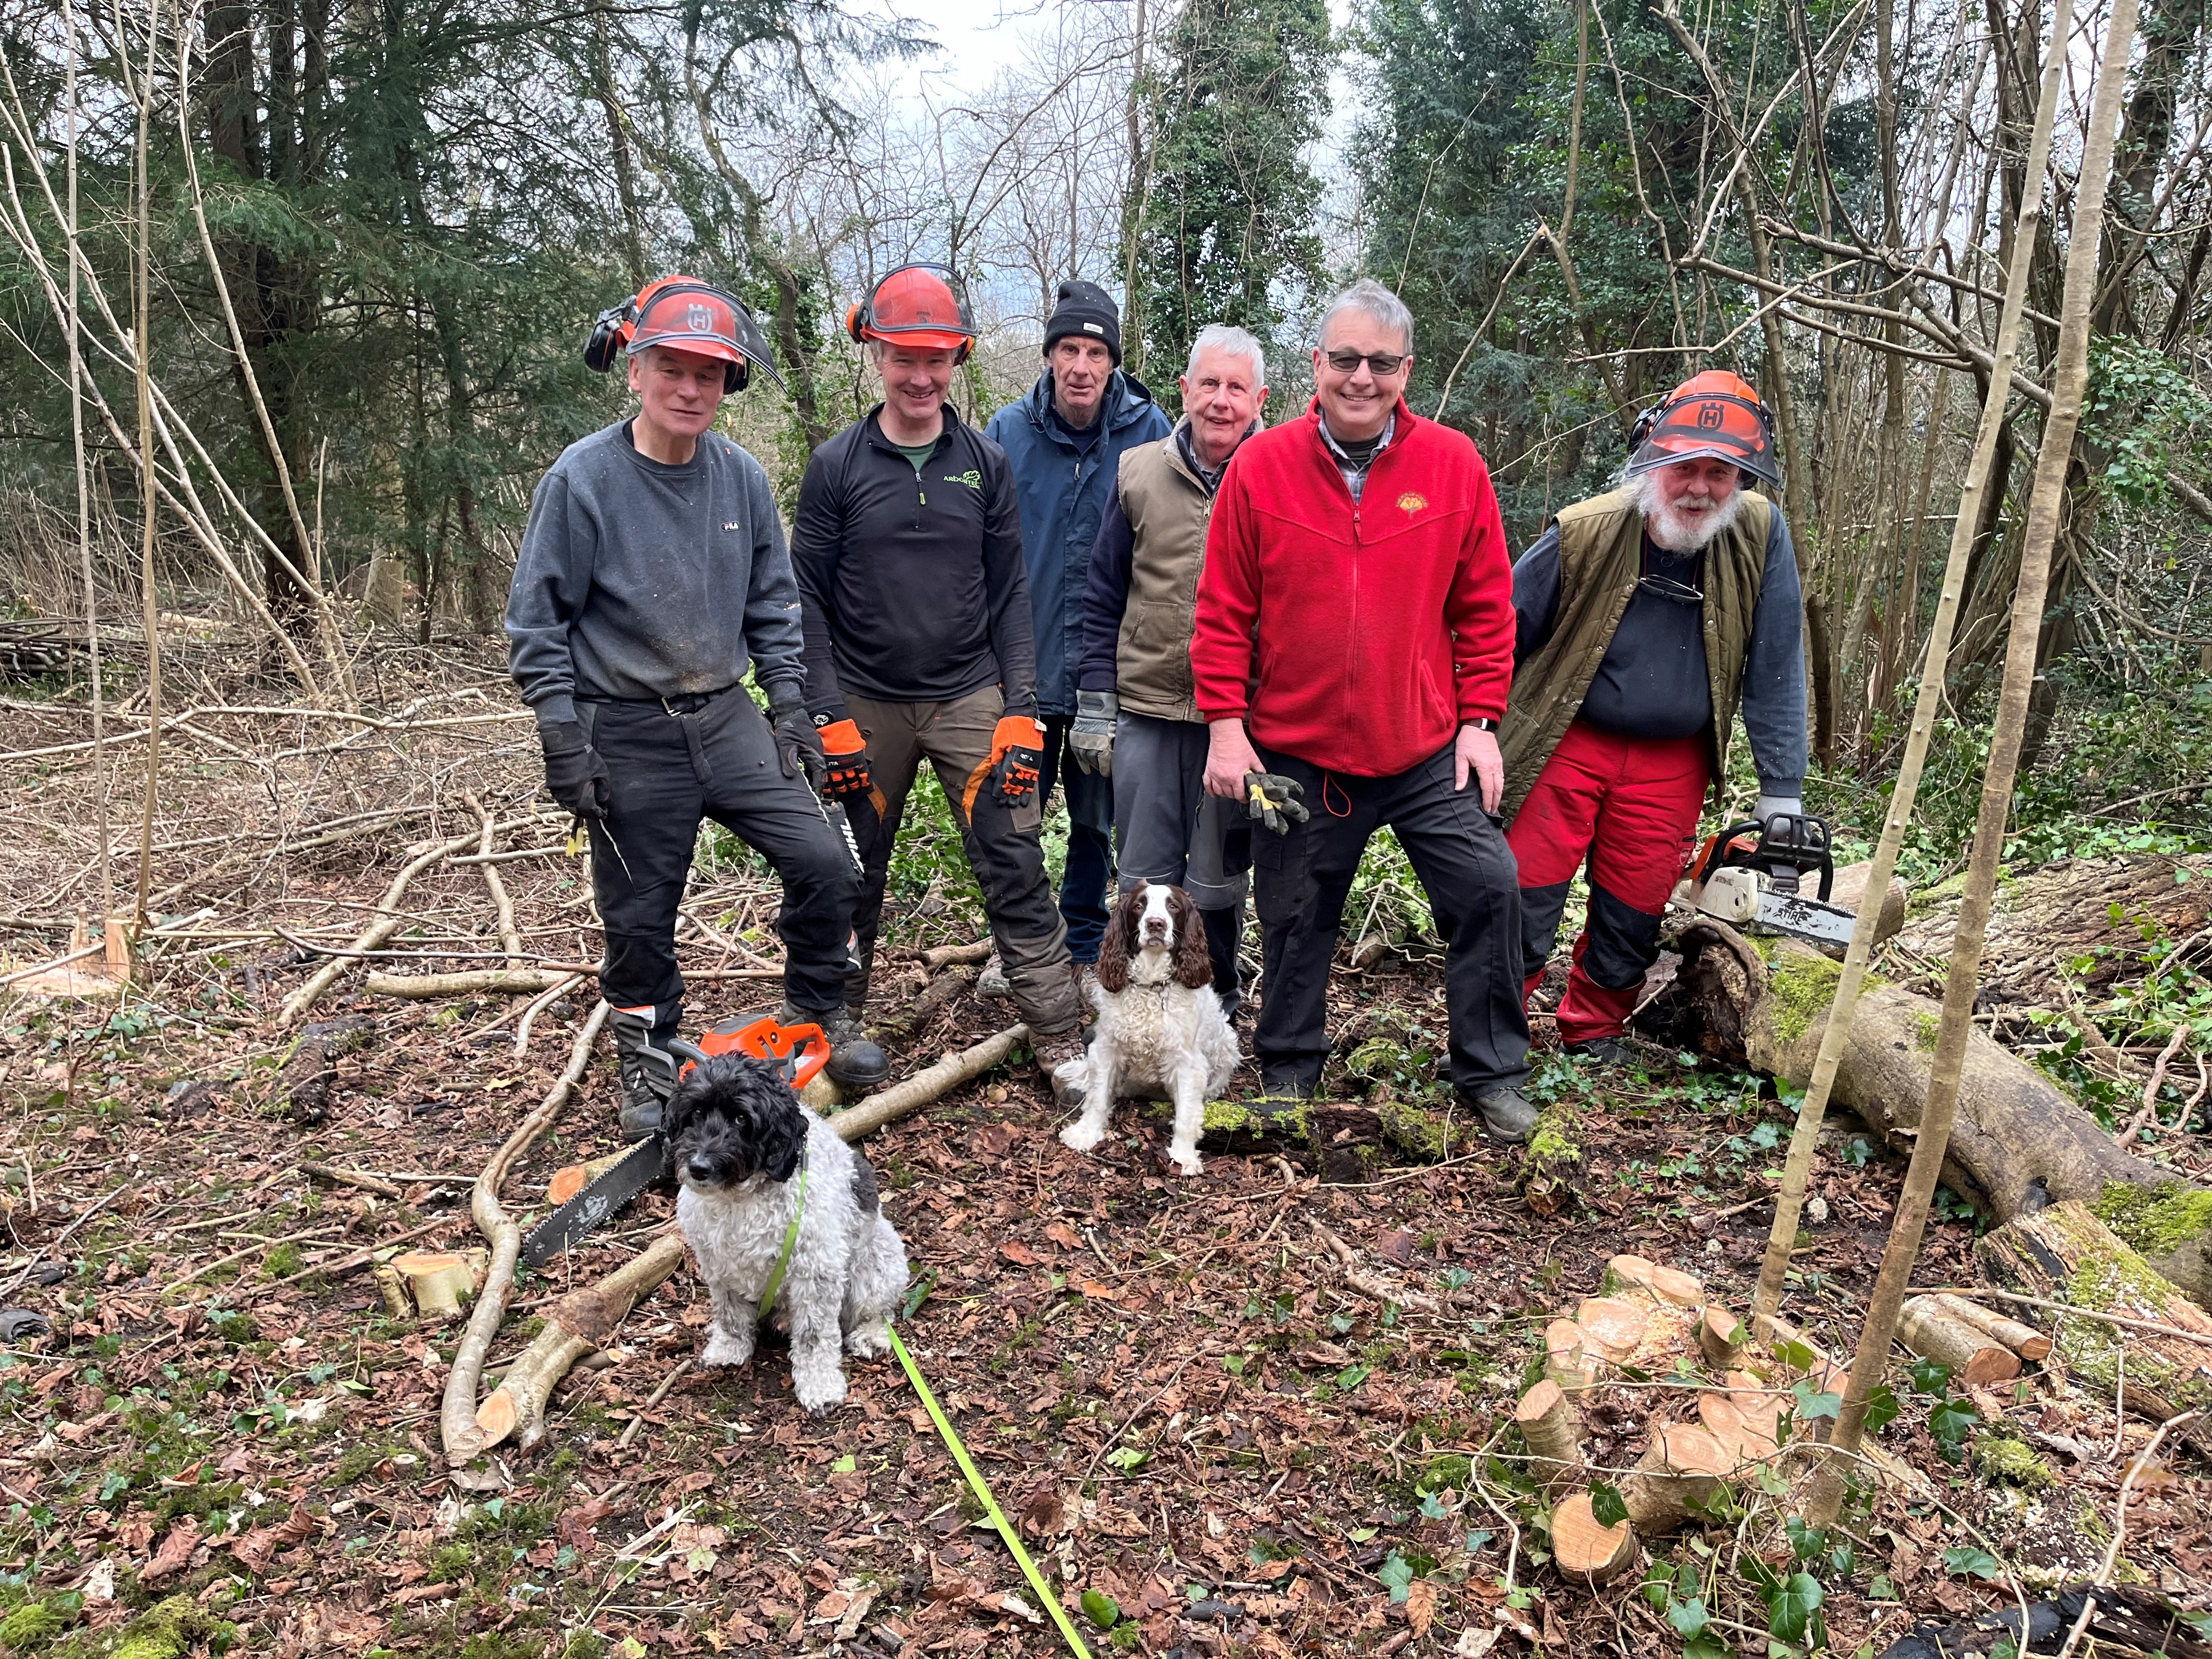 More Friends of Foxley Woods